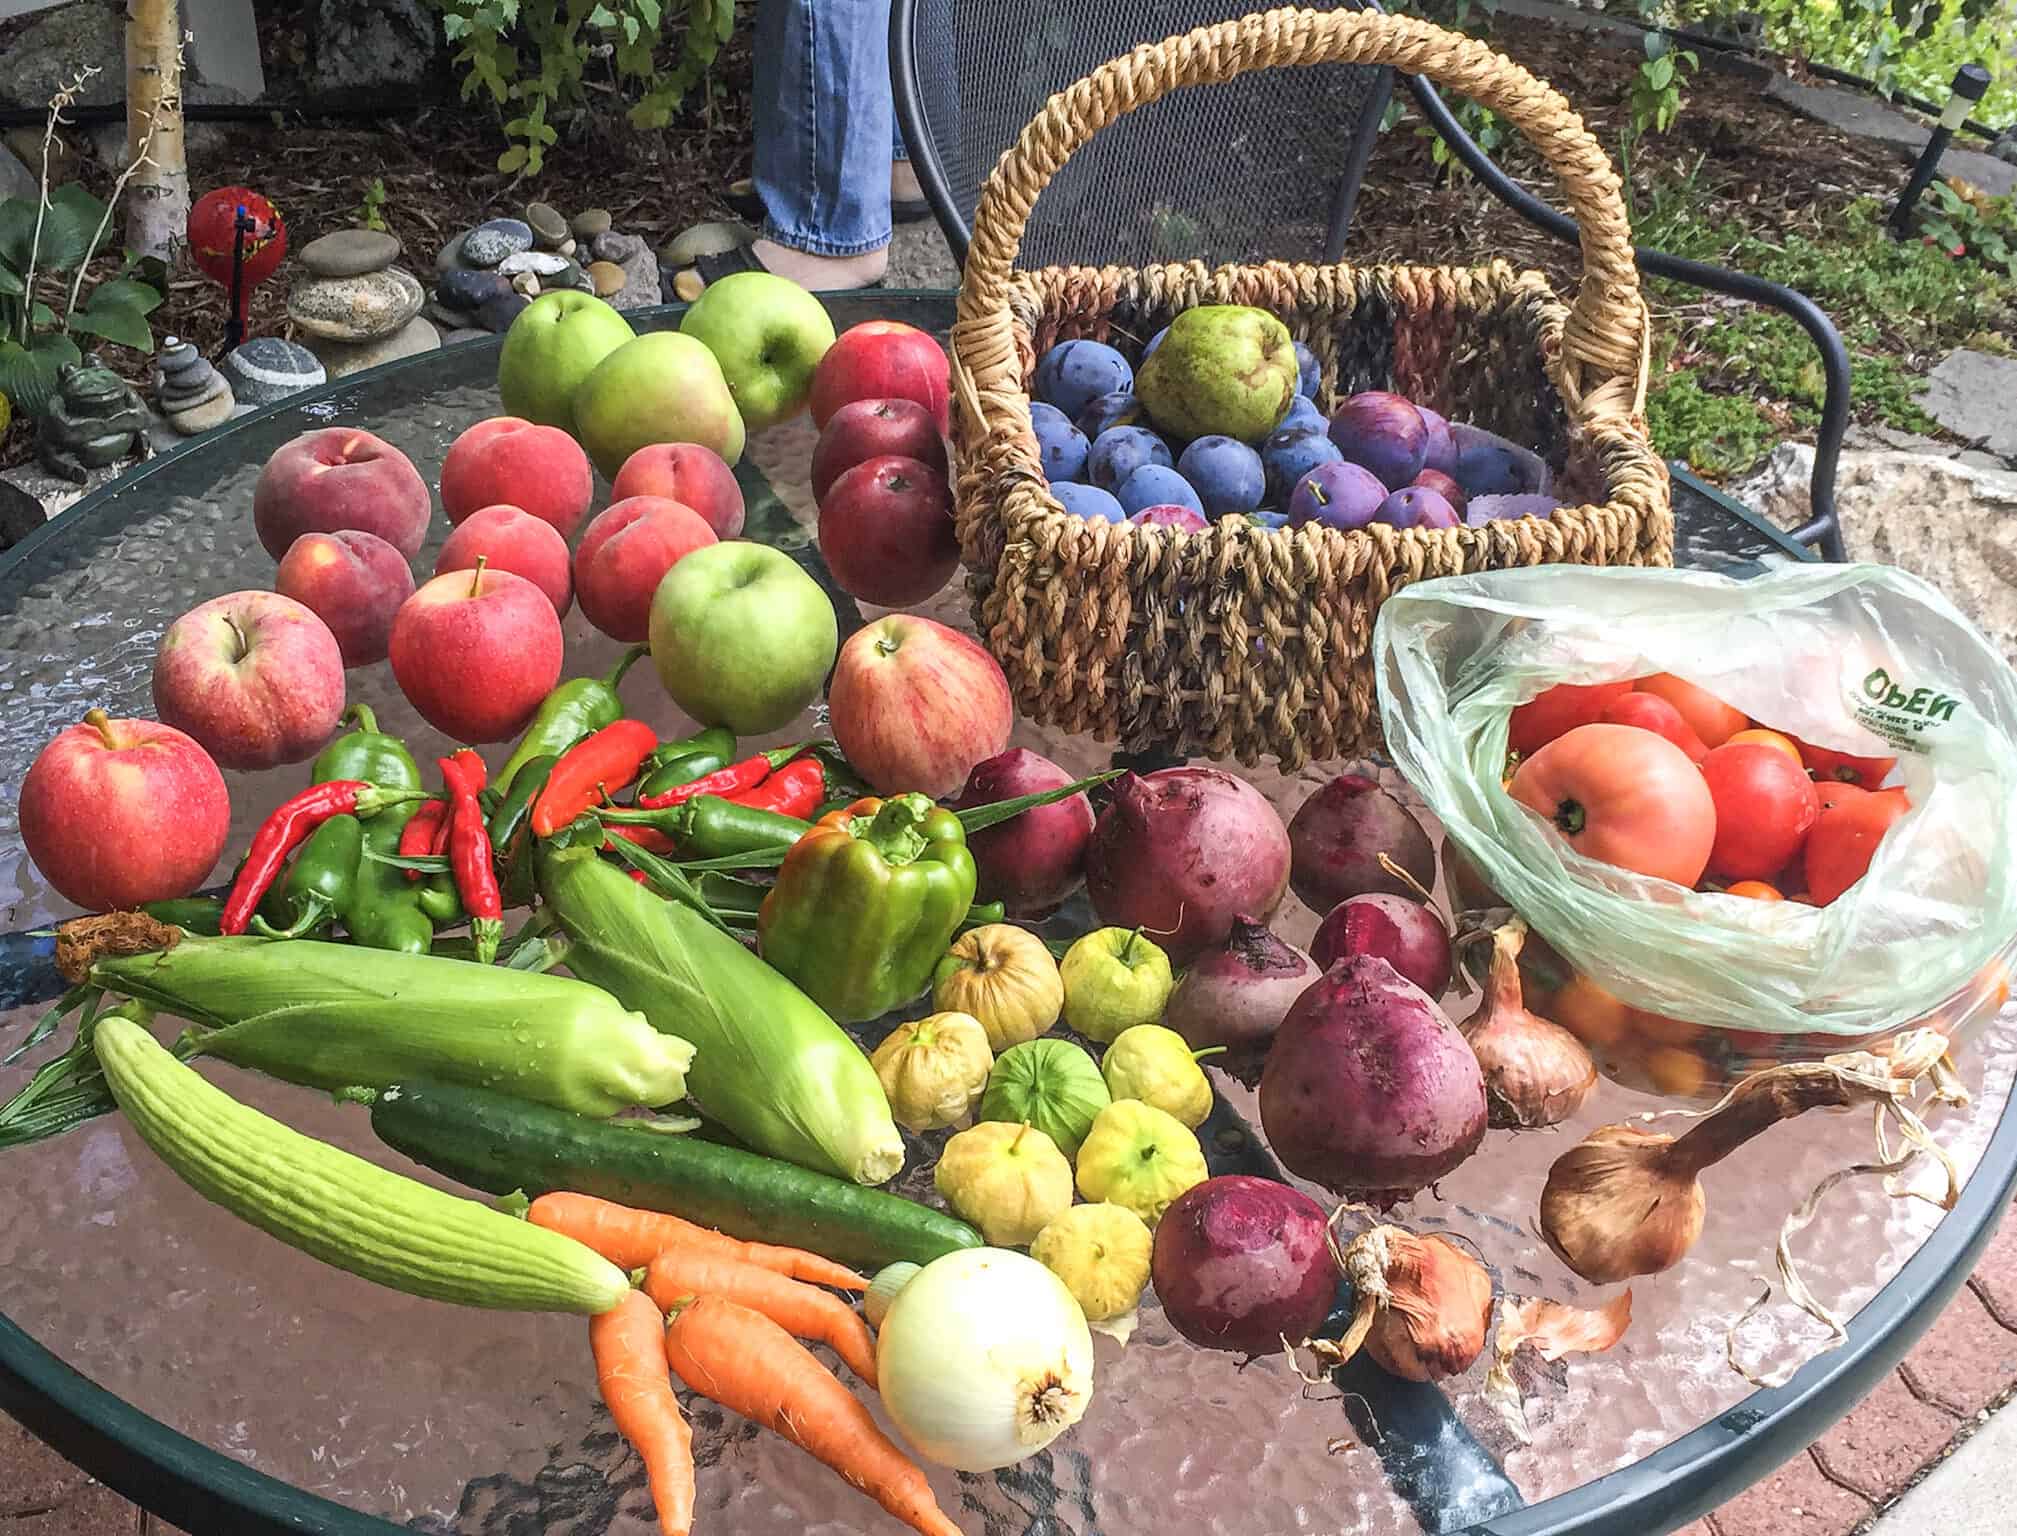 assortment-of-fruits-and-vegetables-from-the-community-garden-spread-out-on-a-table